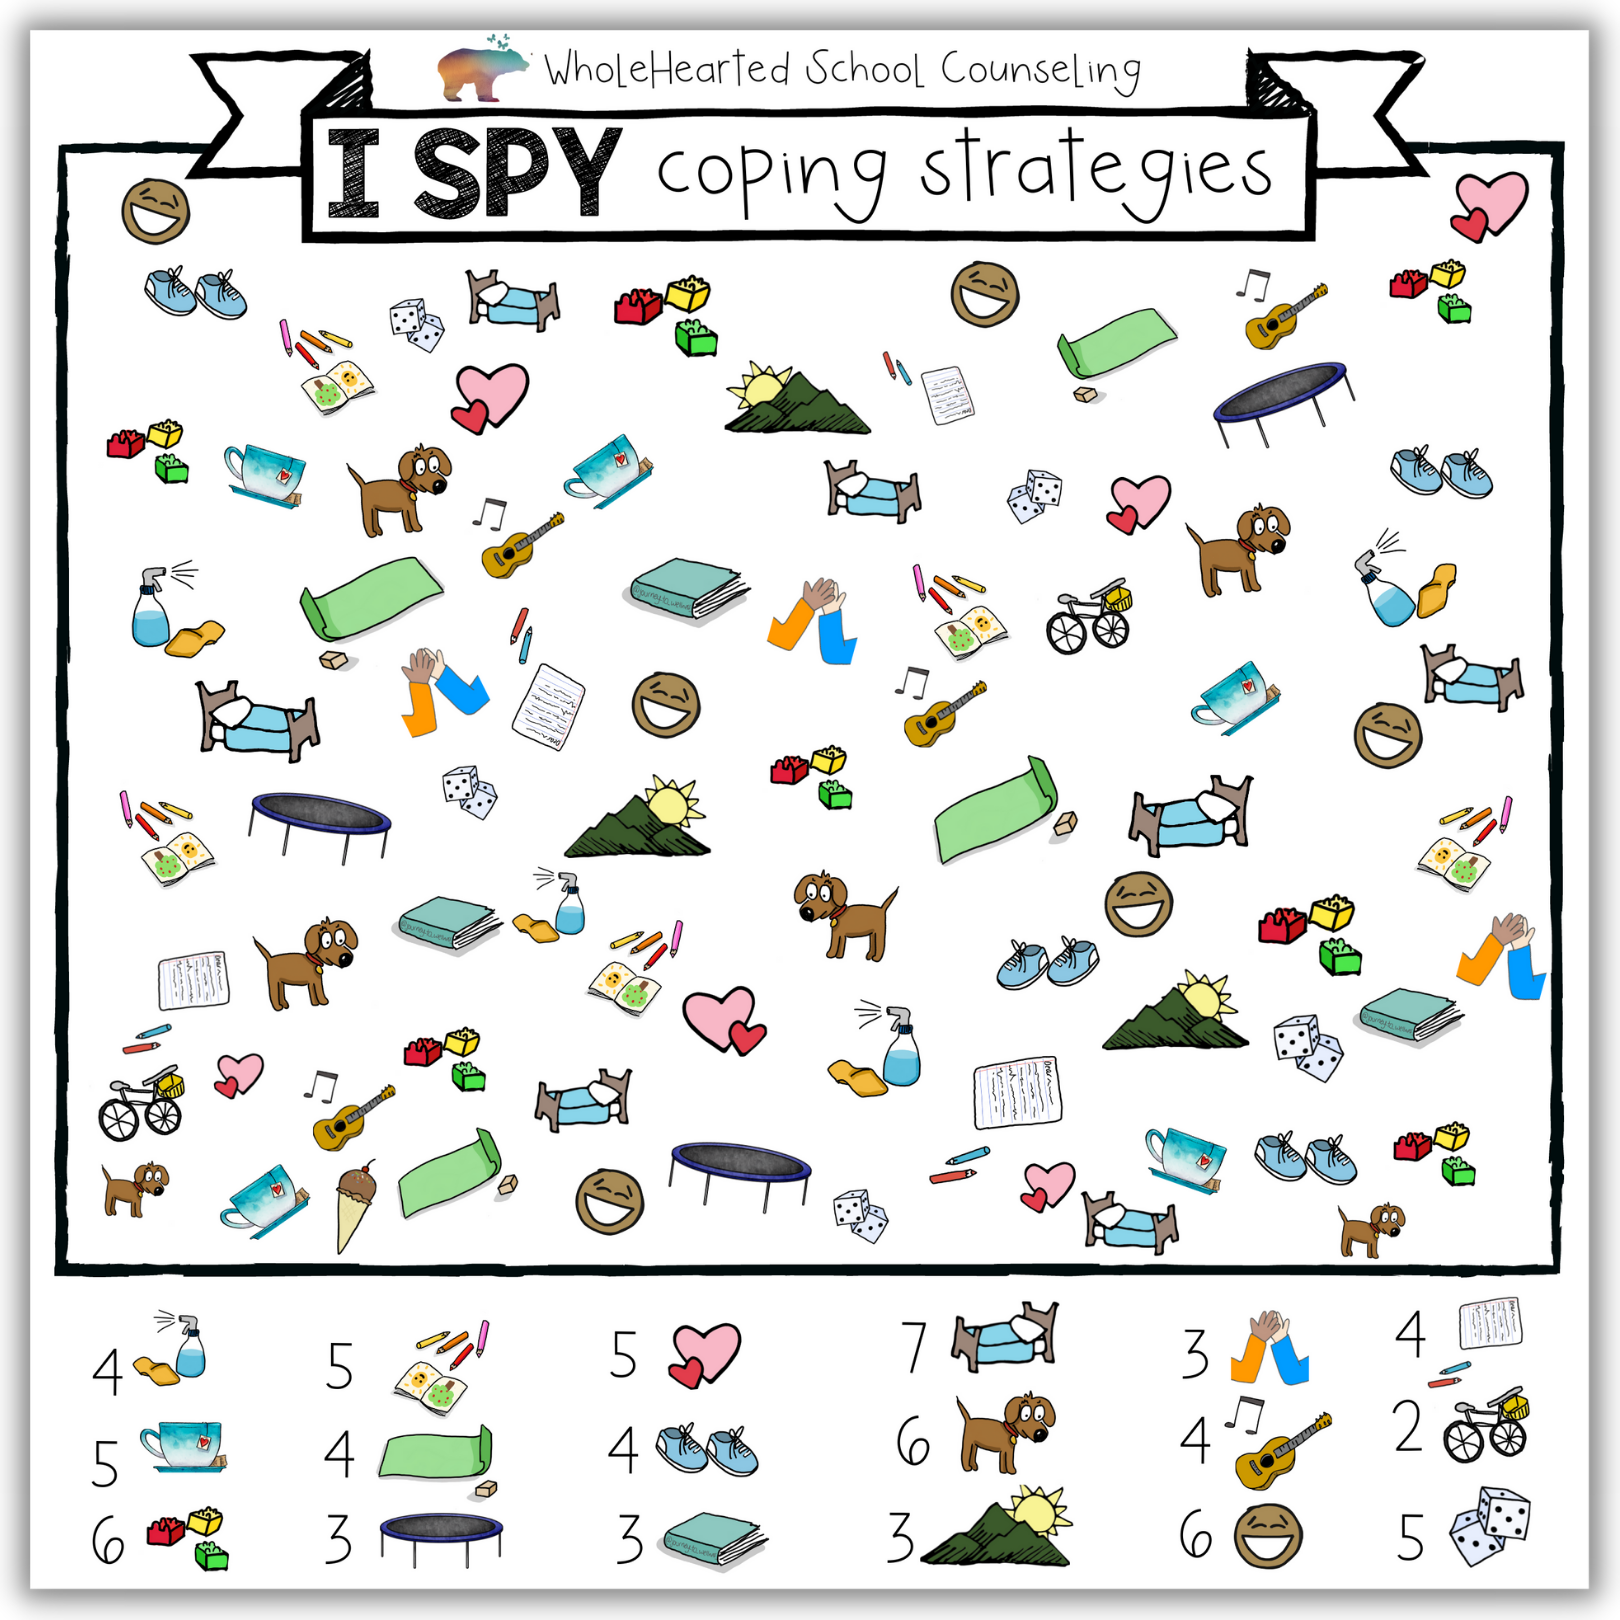 I-Spy Coping Skills Free SEL Activity for Kids